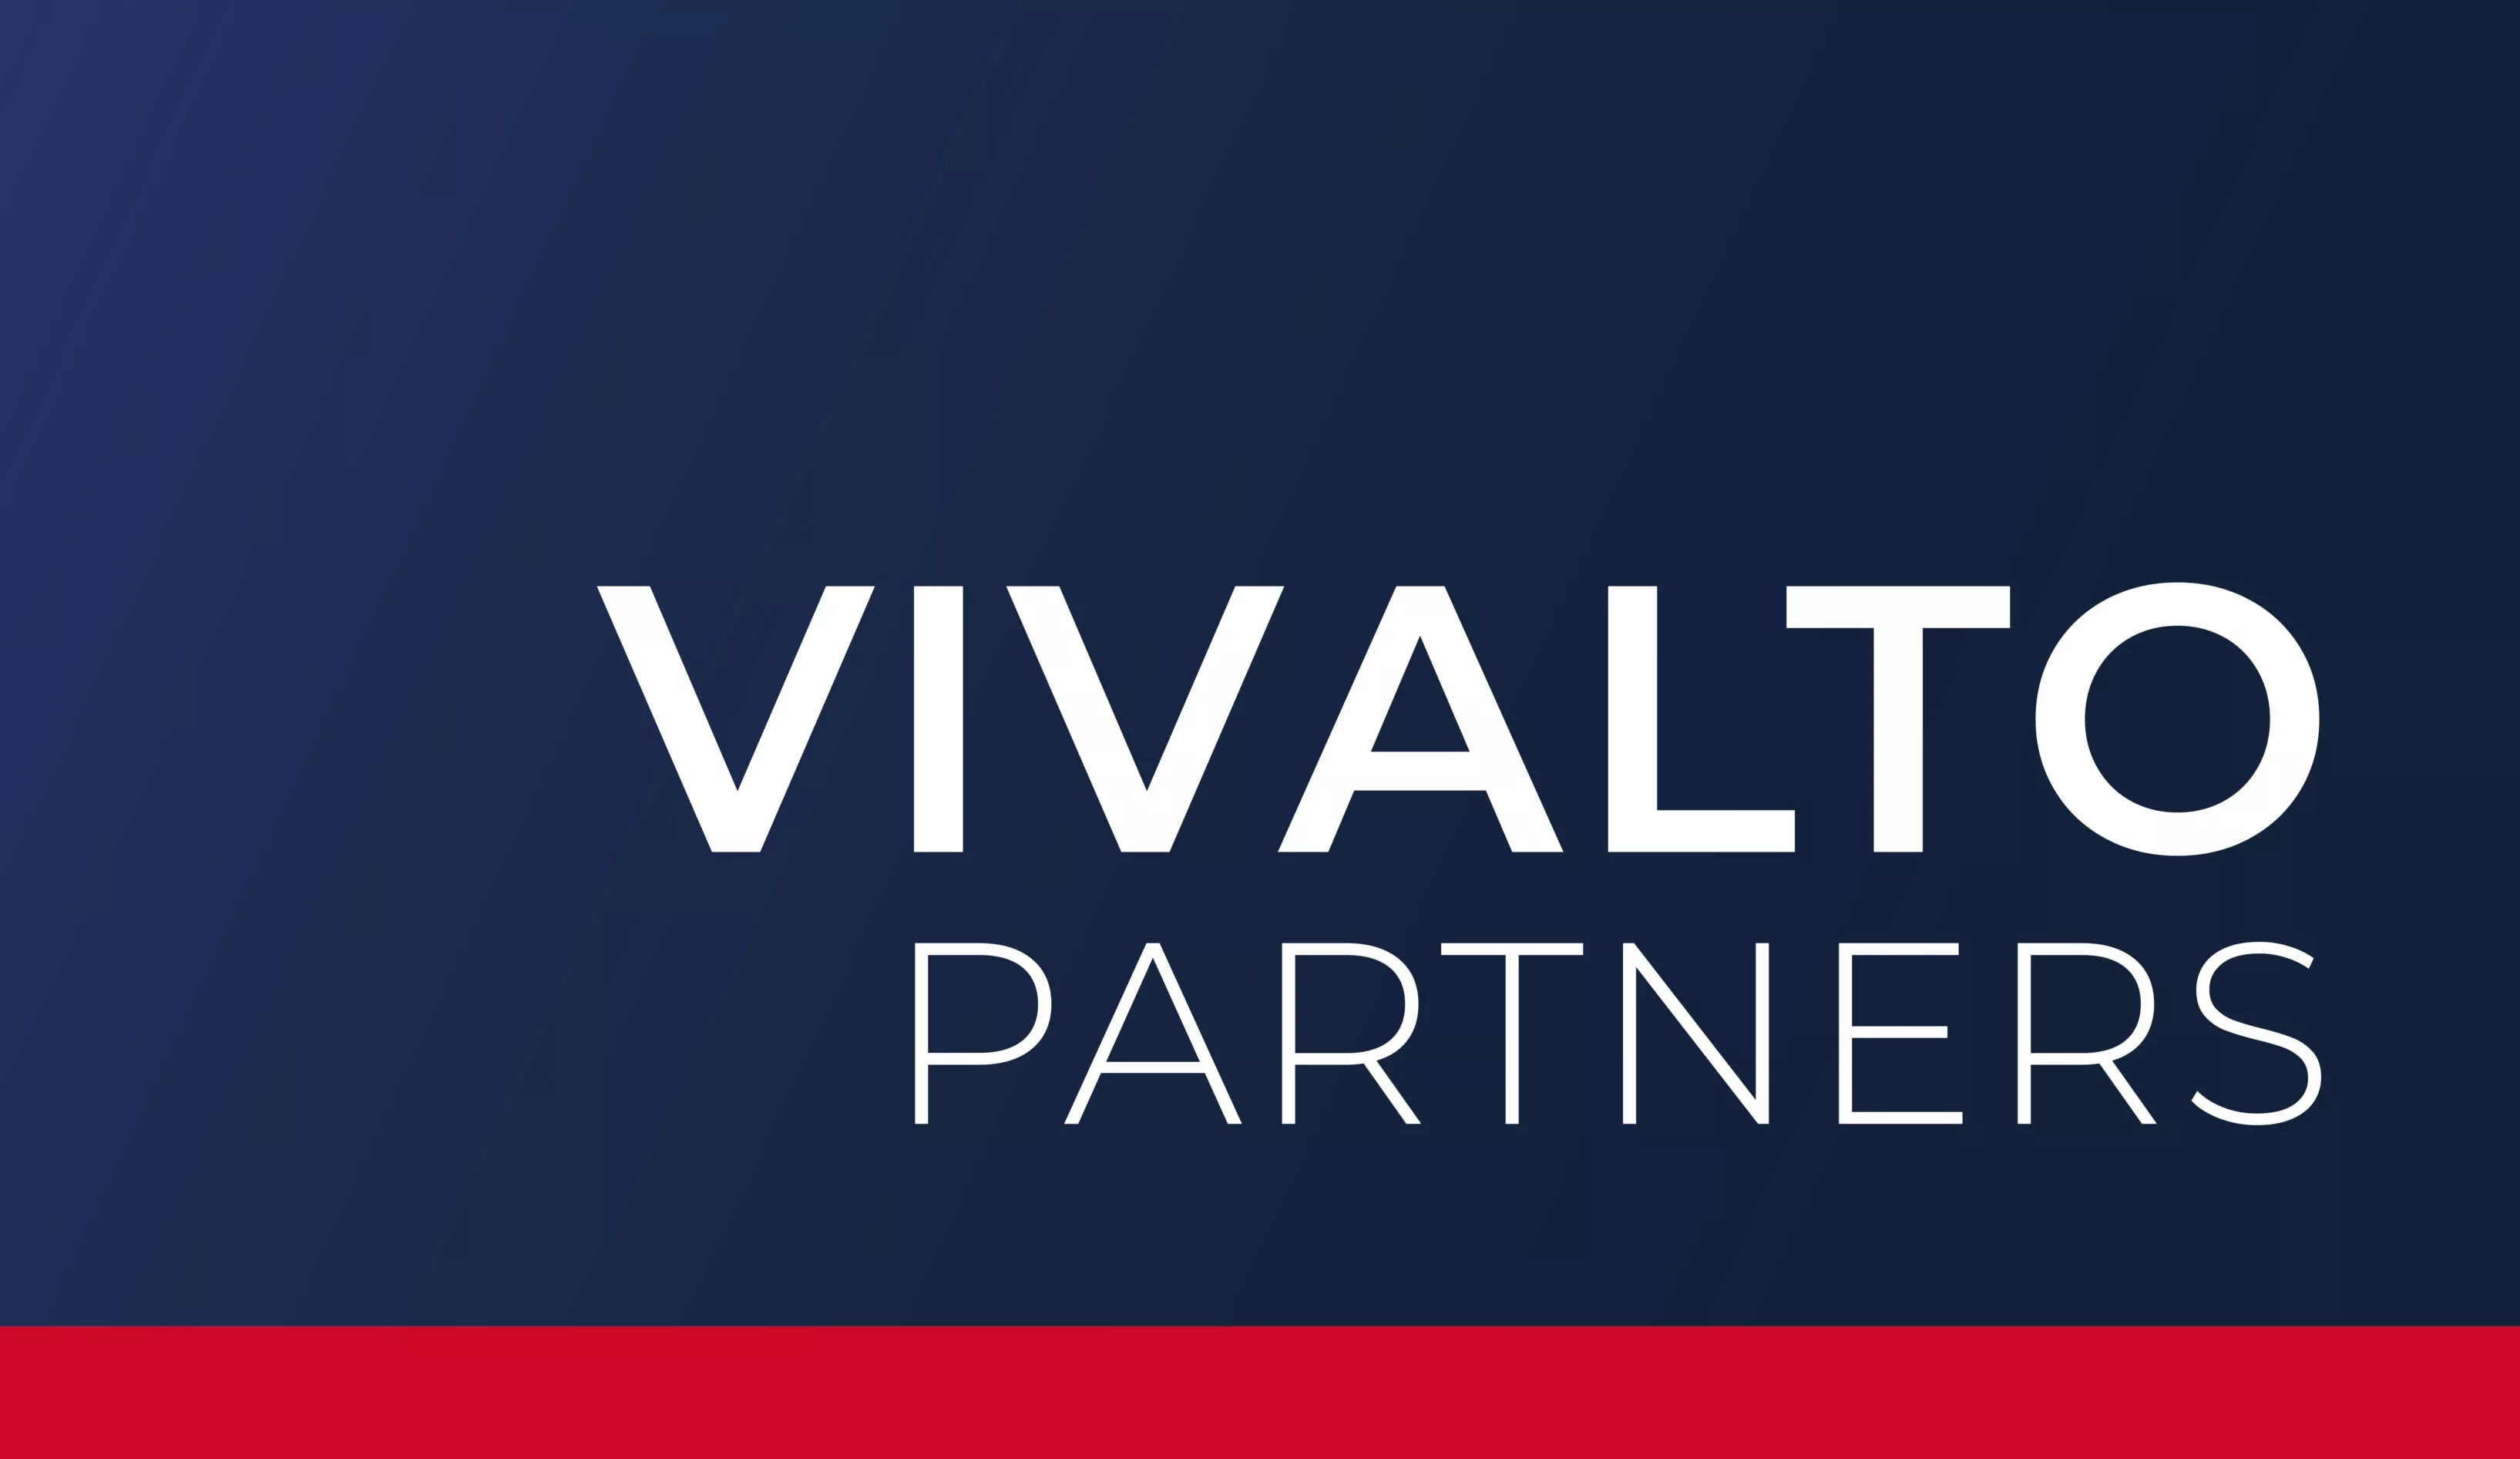 Vivalto Partners is proud to announce the final closing of its first fund at nearly €700M